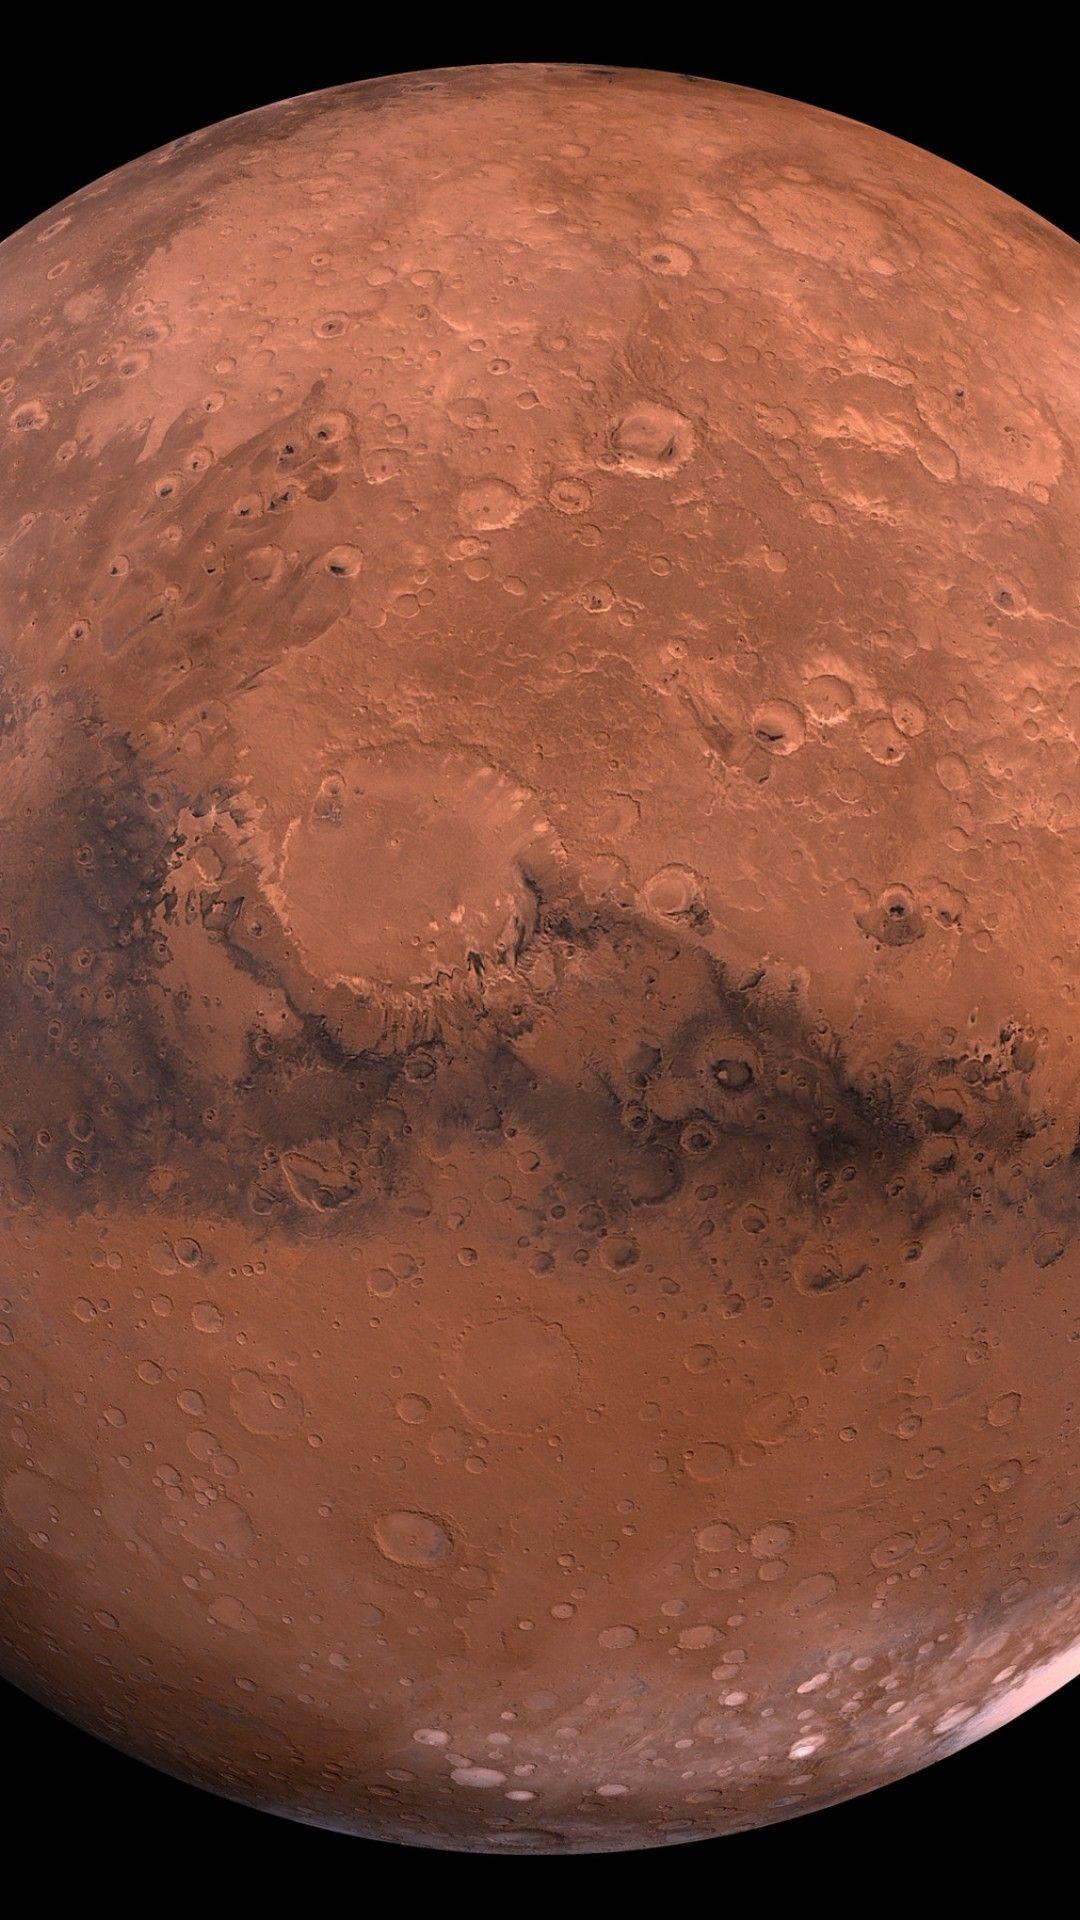 Mars iPhone Wallpapers - Top Free Mars iPhone Backgrounds - WallpaperAccess